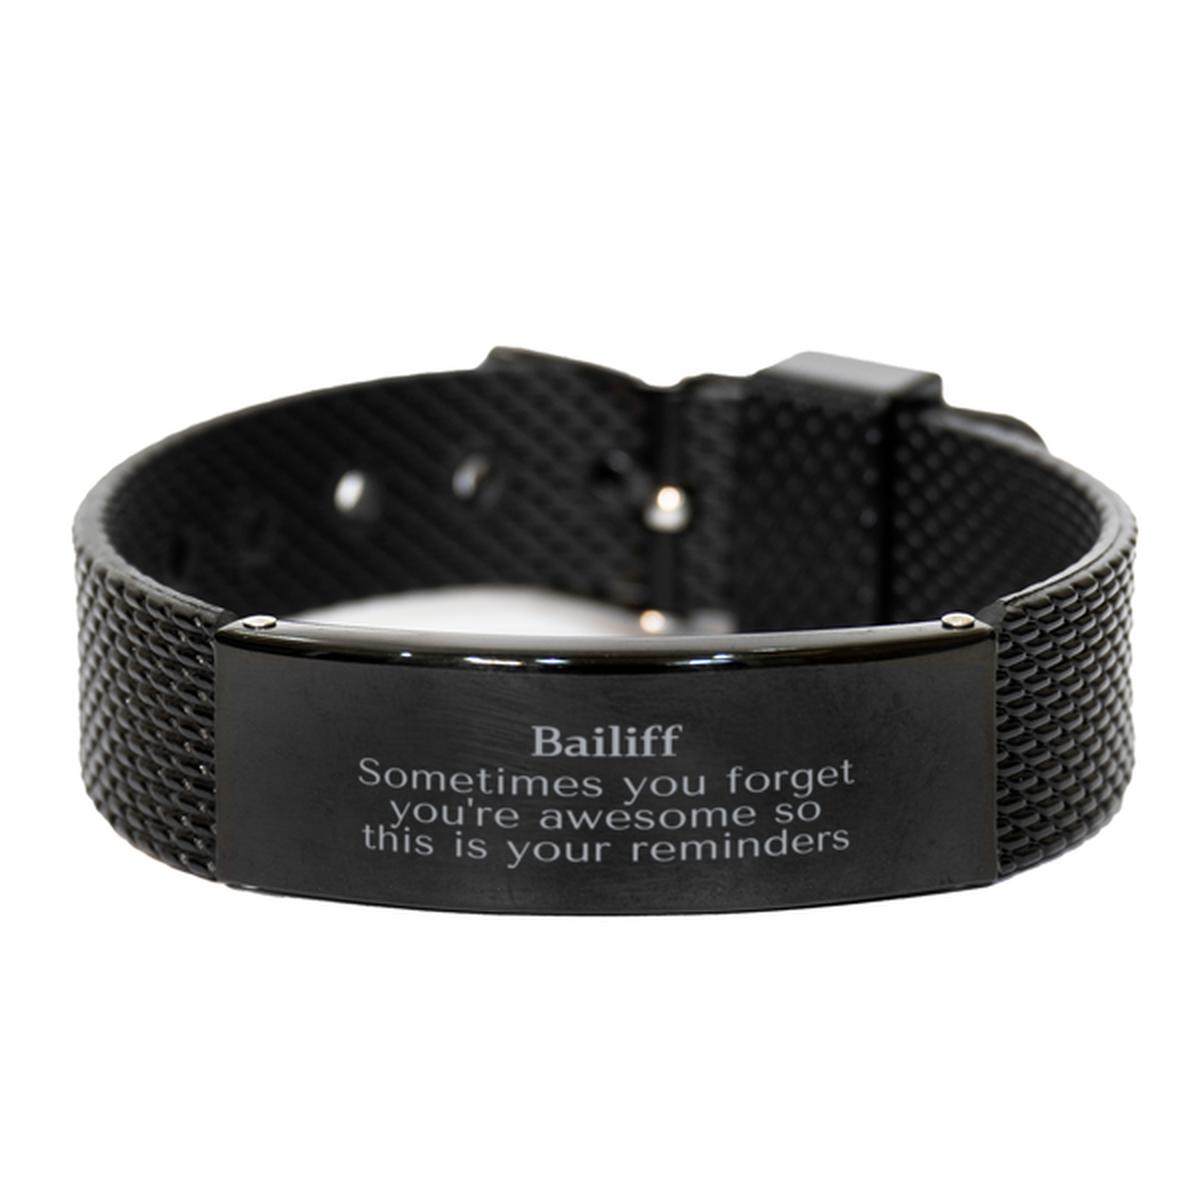 Sentimental Bailiff Black Shark Mesh Bracelet, Bailiff Sometimes you forget you're awesome so this is your reminders, Graduation Christmas Birthday Gifts for Bailiff, Men, Women, Coworkers